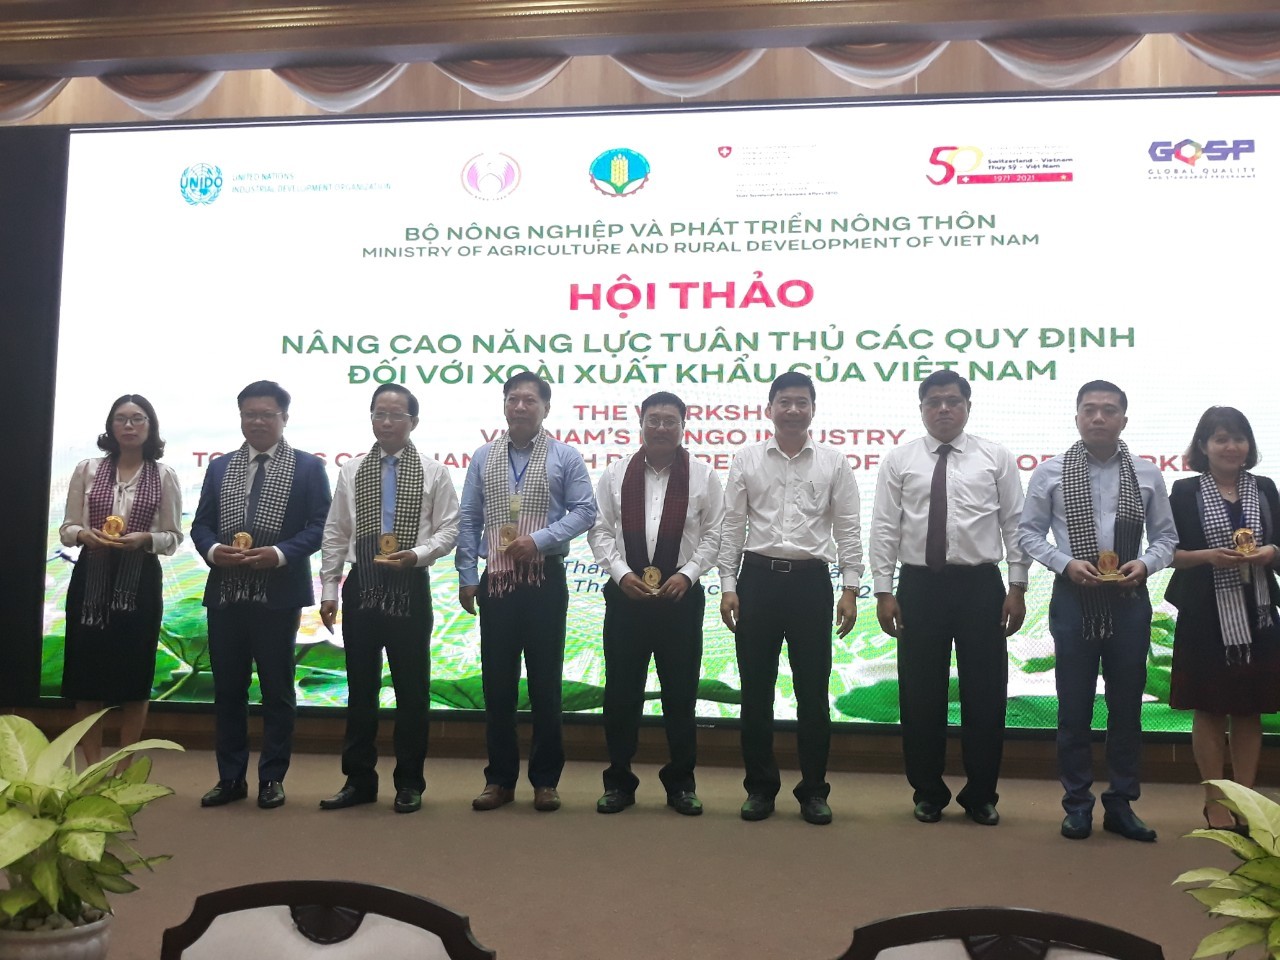 Delegates at the workshop on improving compliance with regulations for Vietnamese mango exports, taking place in Dong Thap on April 12, 2021.